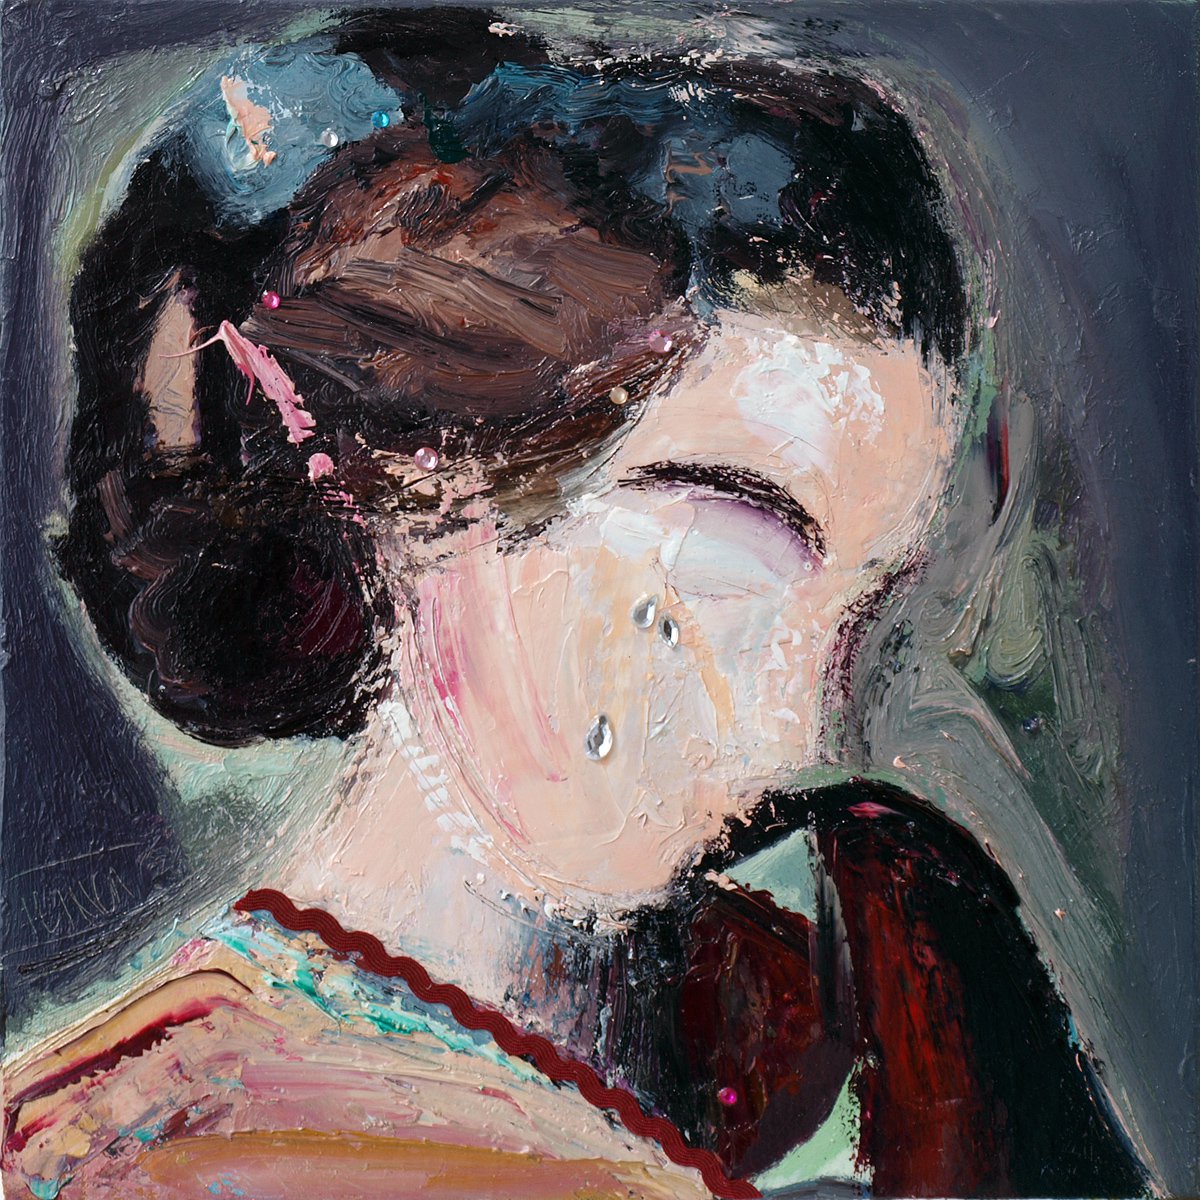 OFFER! Weeping woman (L’une 53) by Catalin Ilinca